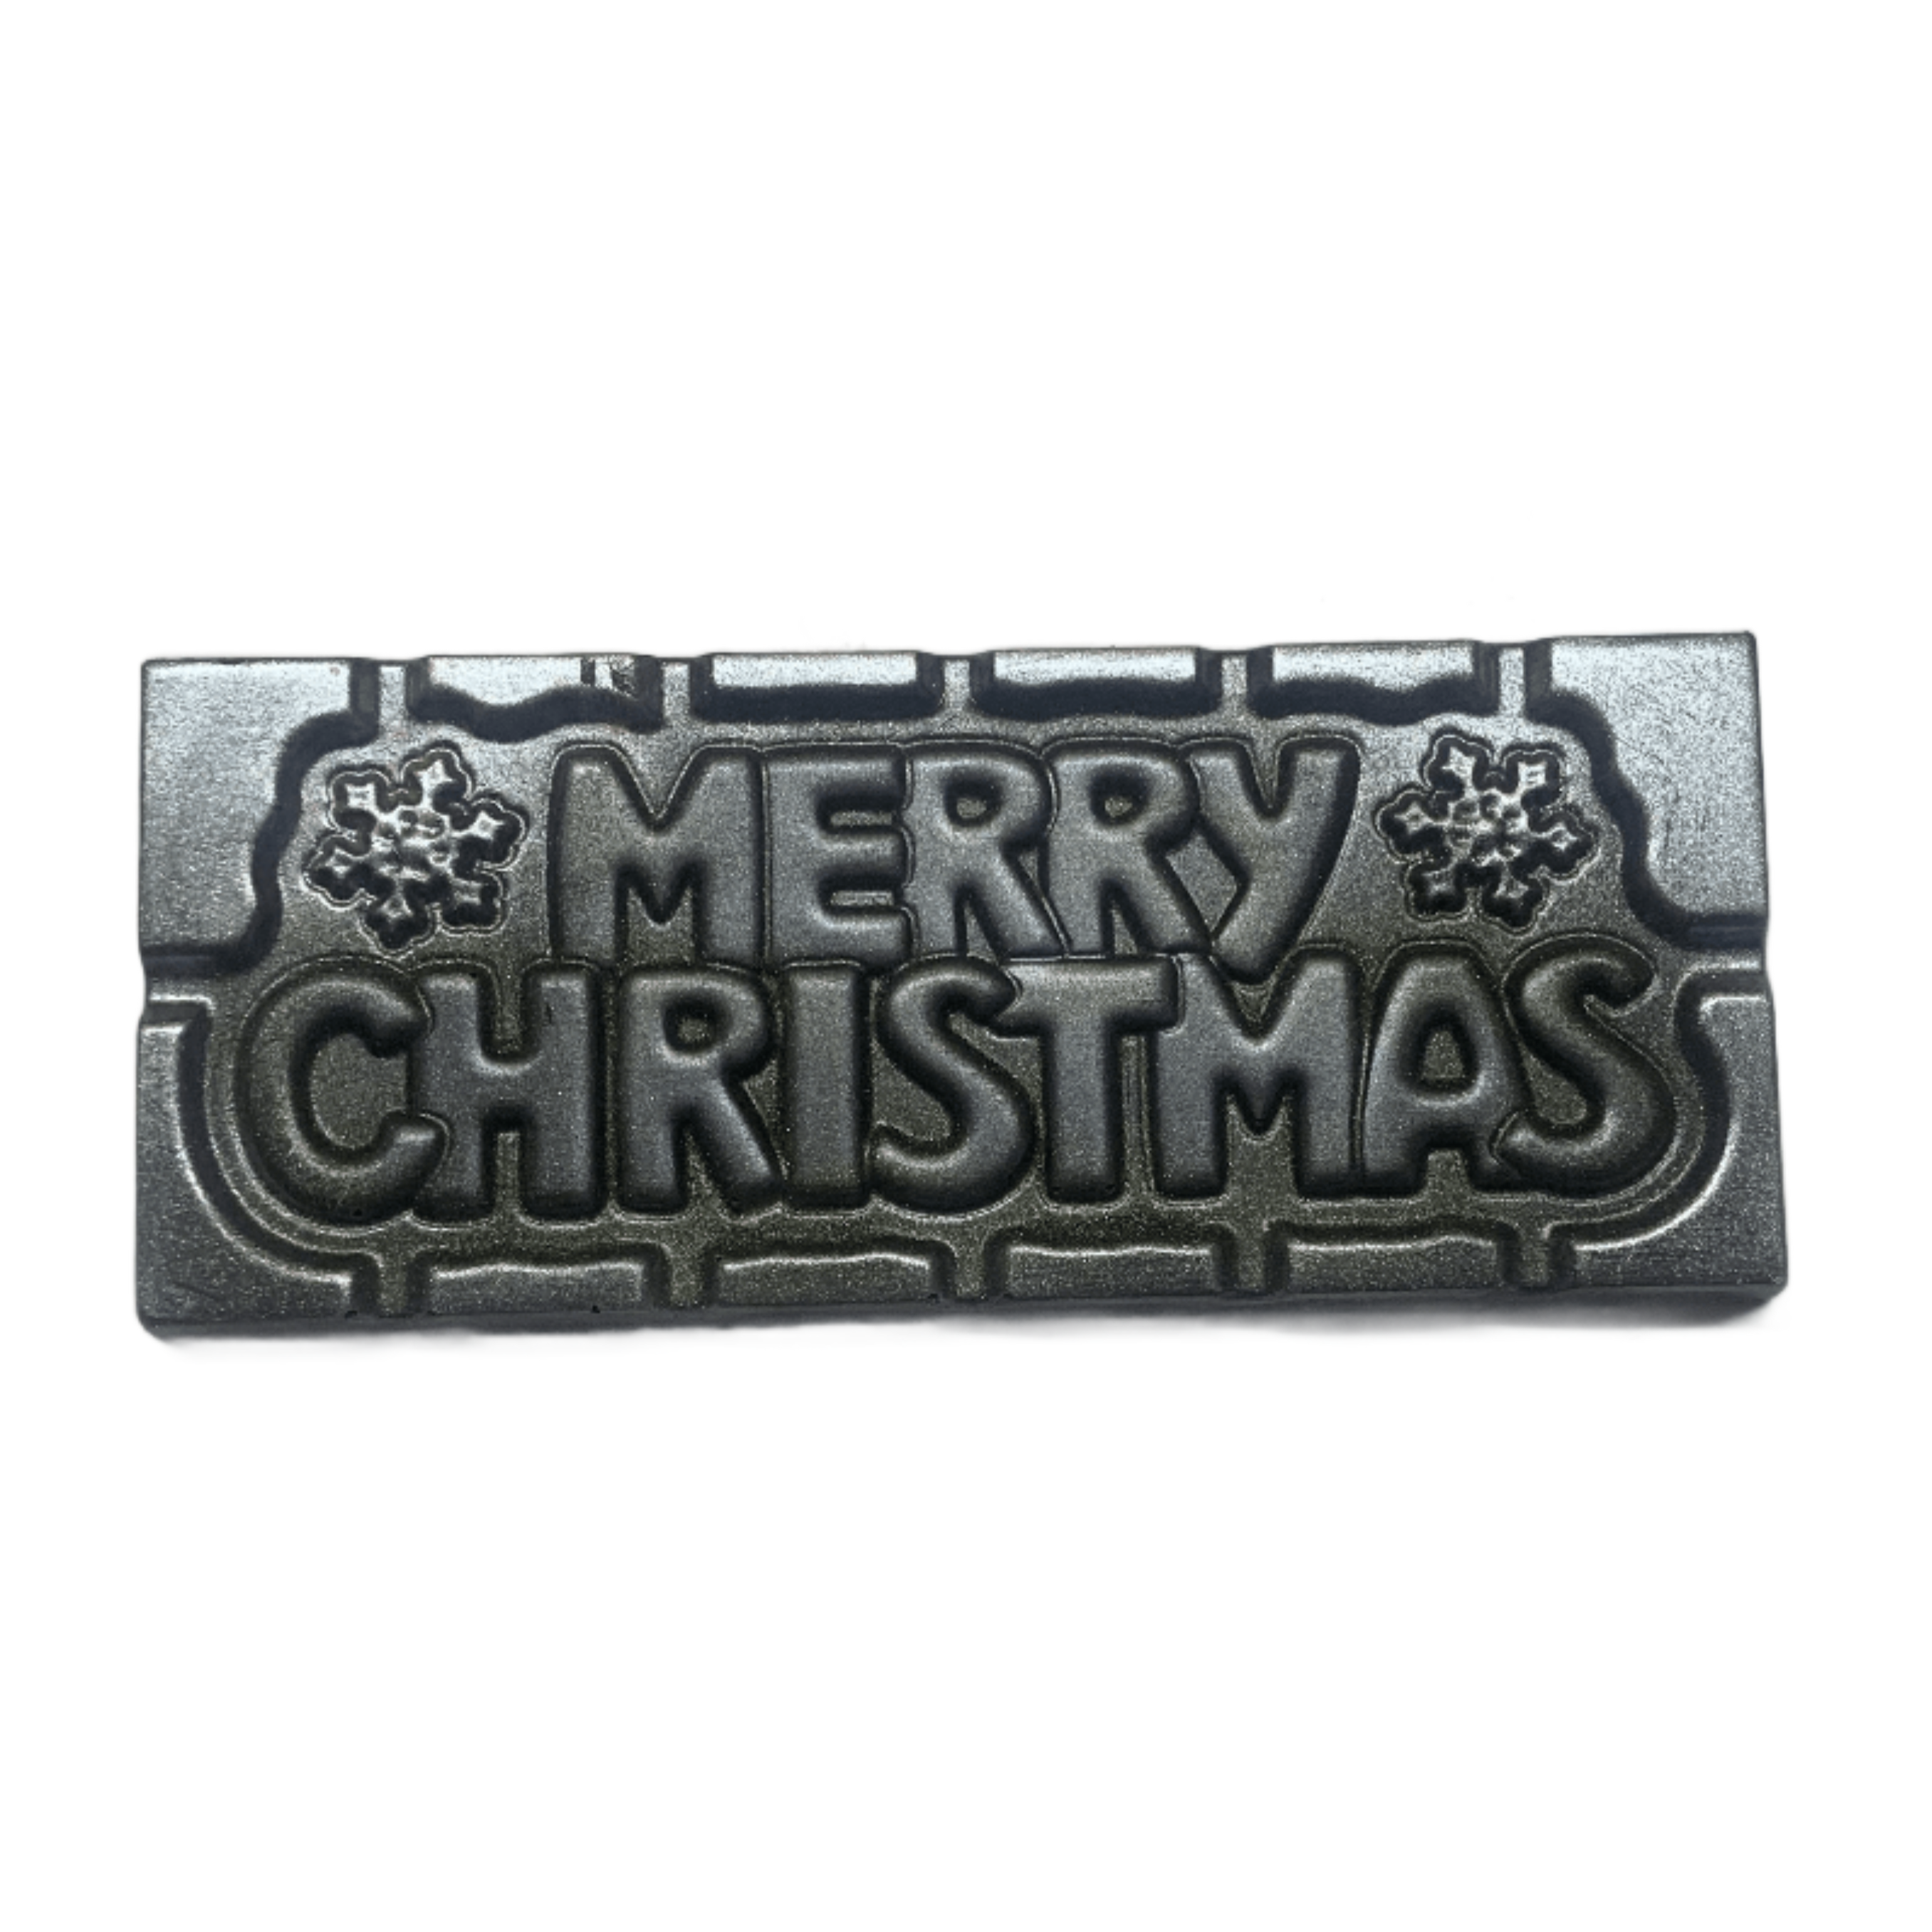 Say_Merry_Christmas_Unwrapped-min.png